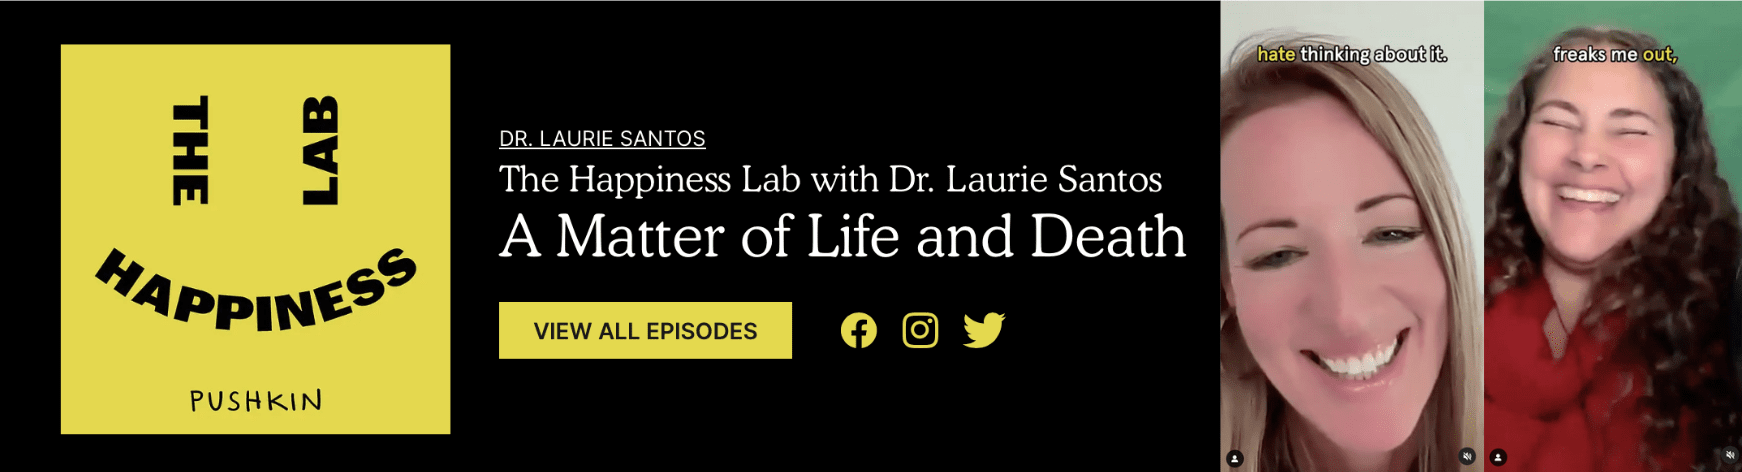 Jodi Wellman on The Happiness Lab with Dr. Laurie Santos